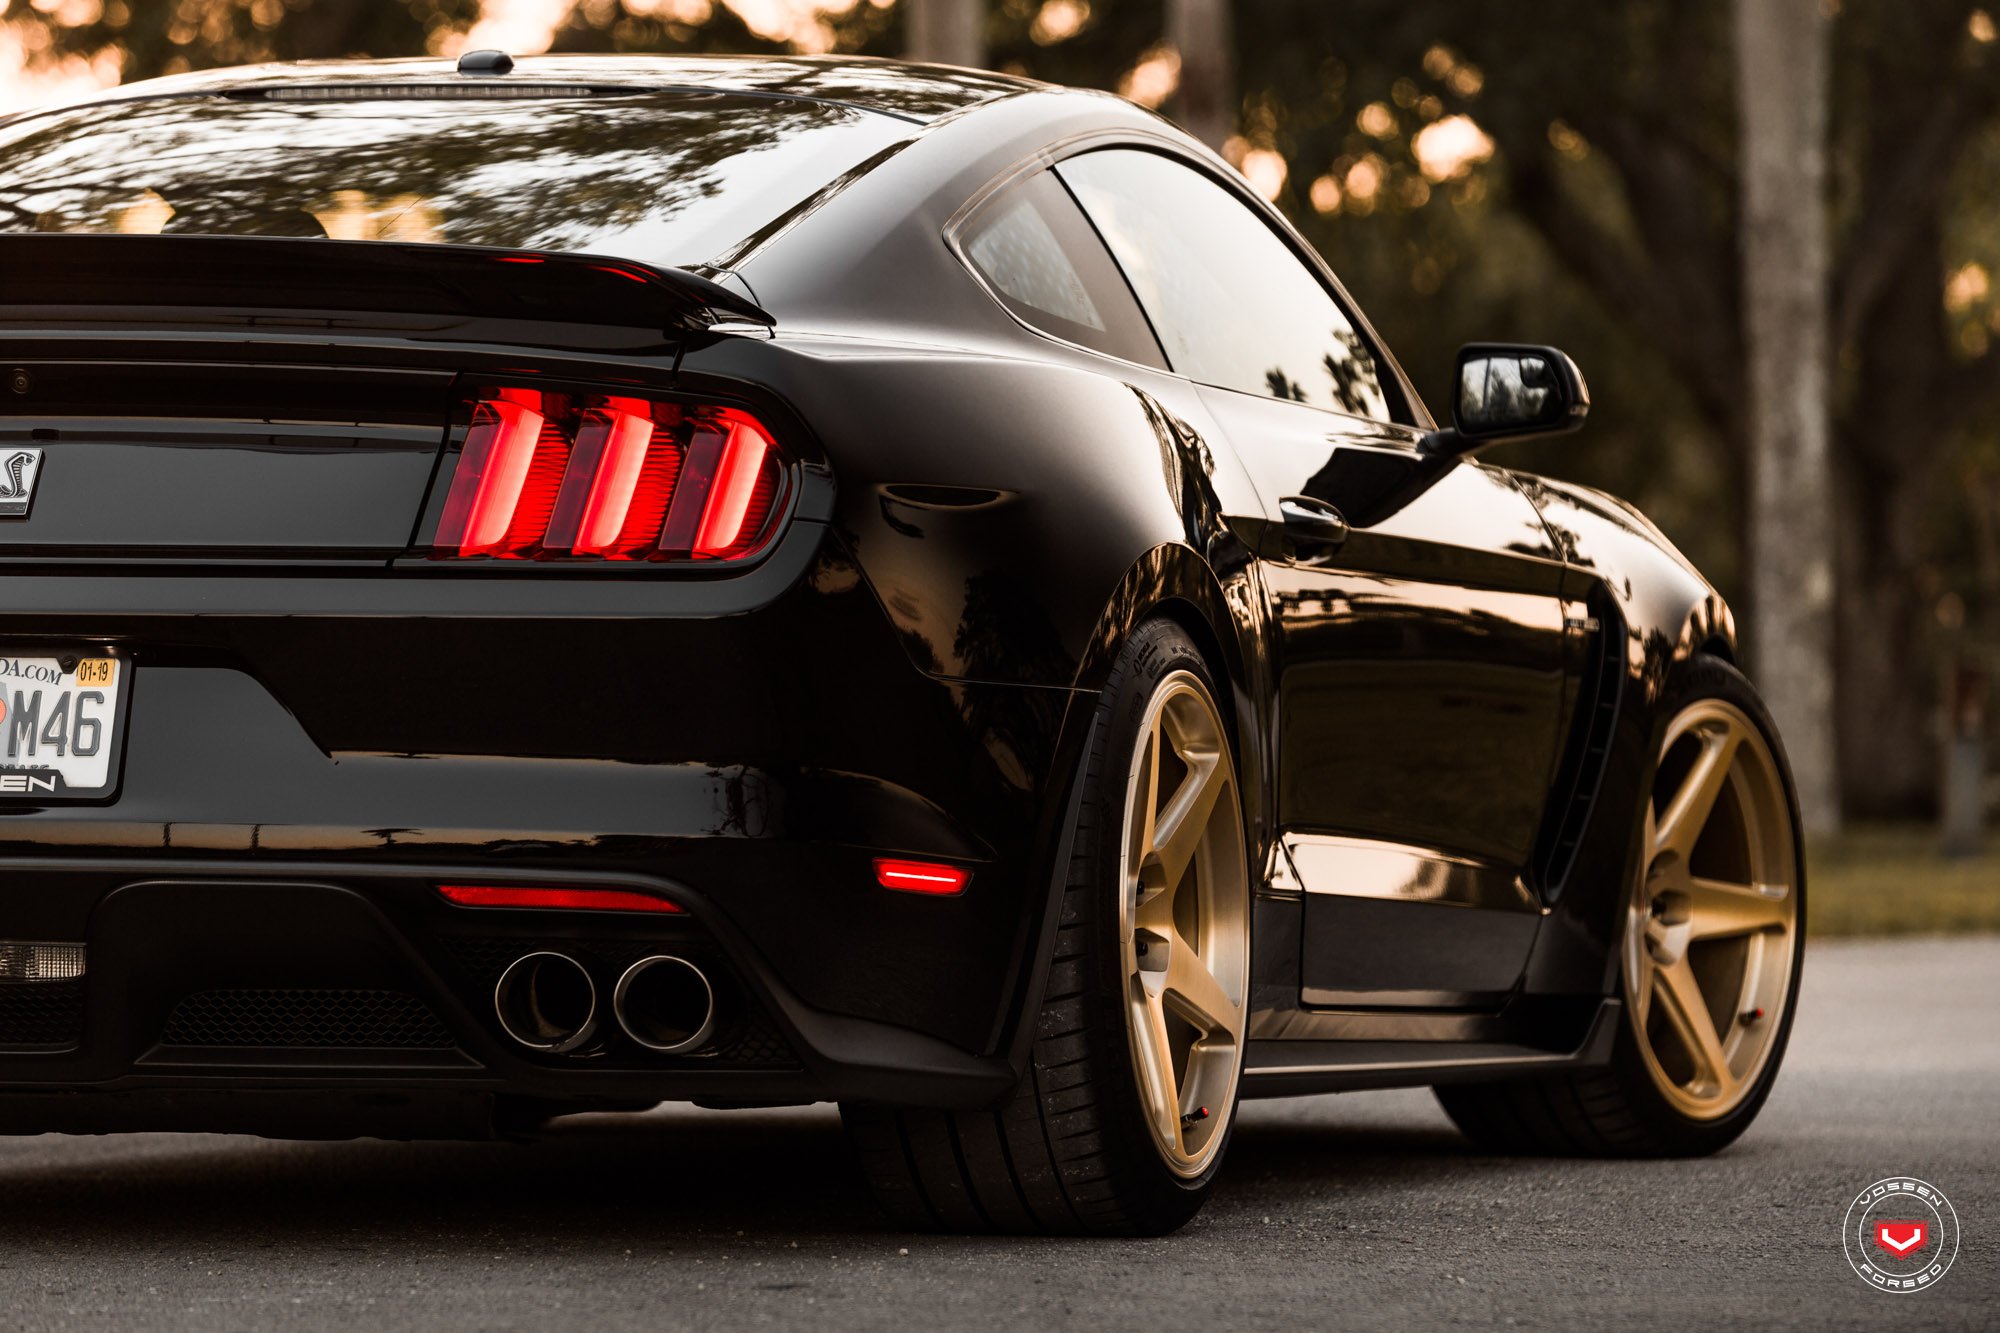 Aftermarket Rear Spoiler on Black Ford Mustang GT350 - Photo by Vossen